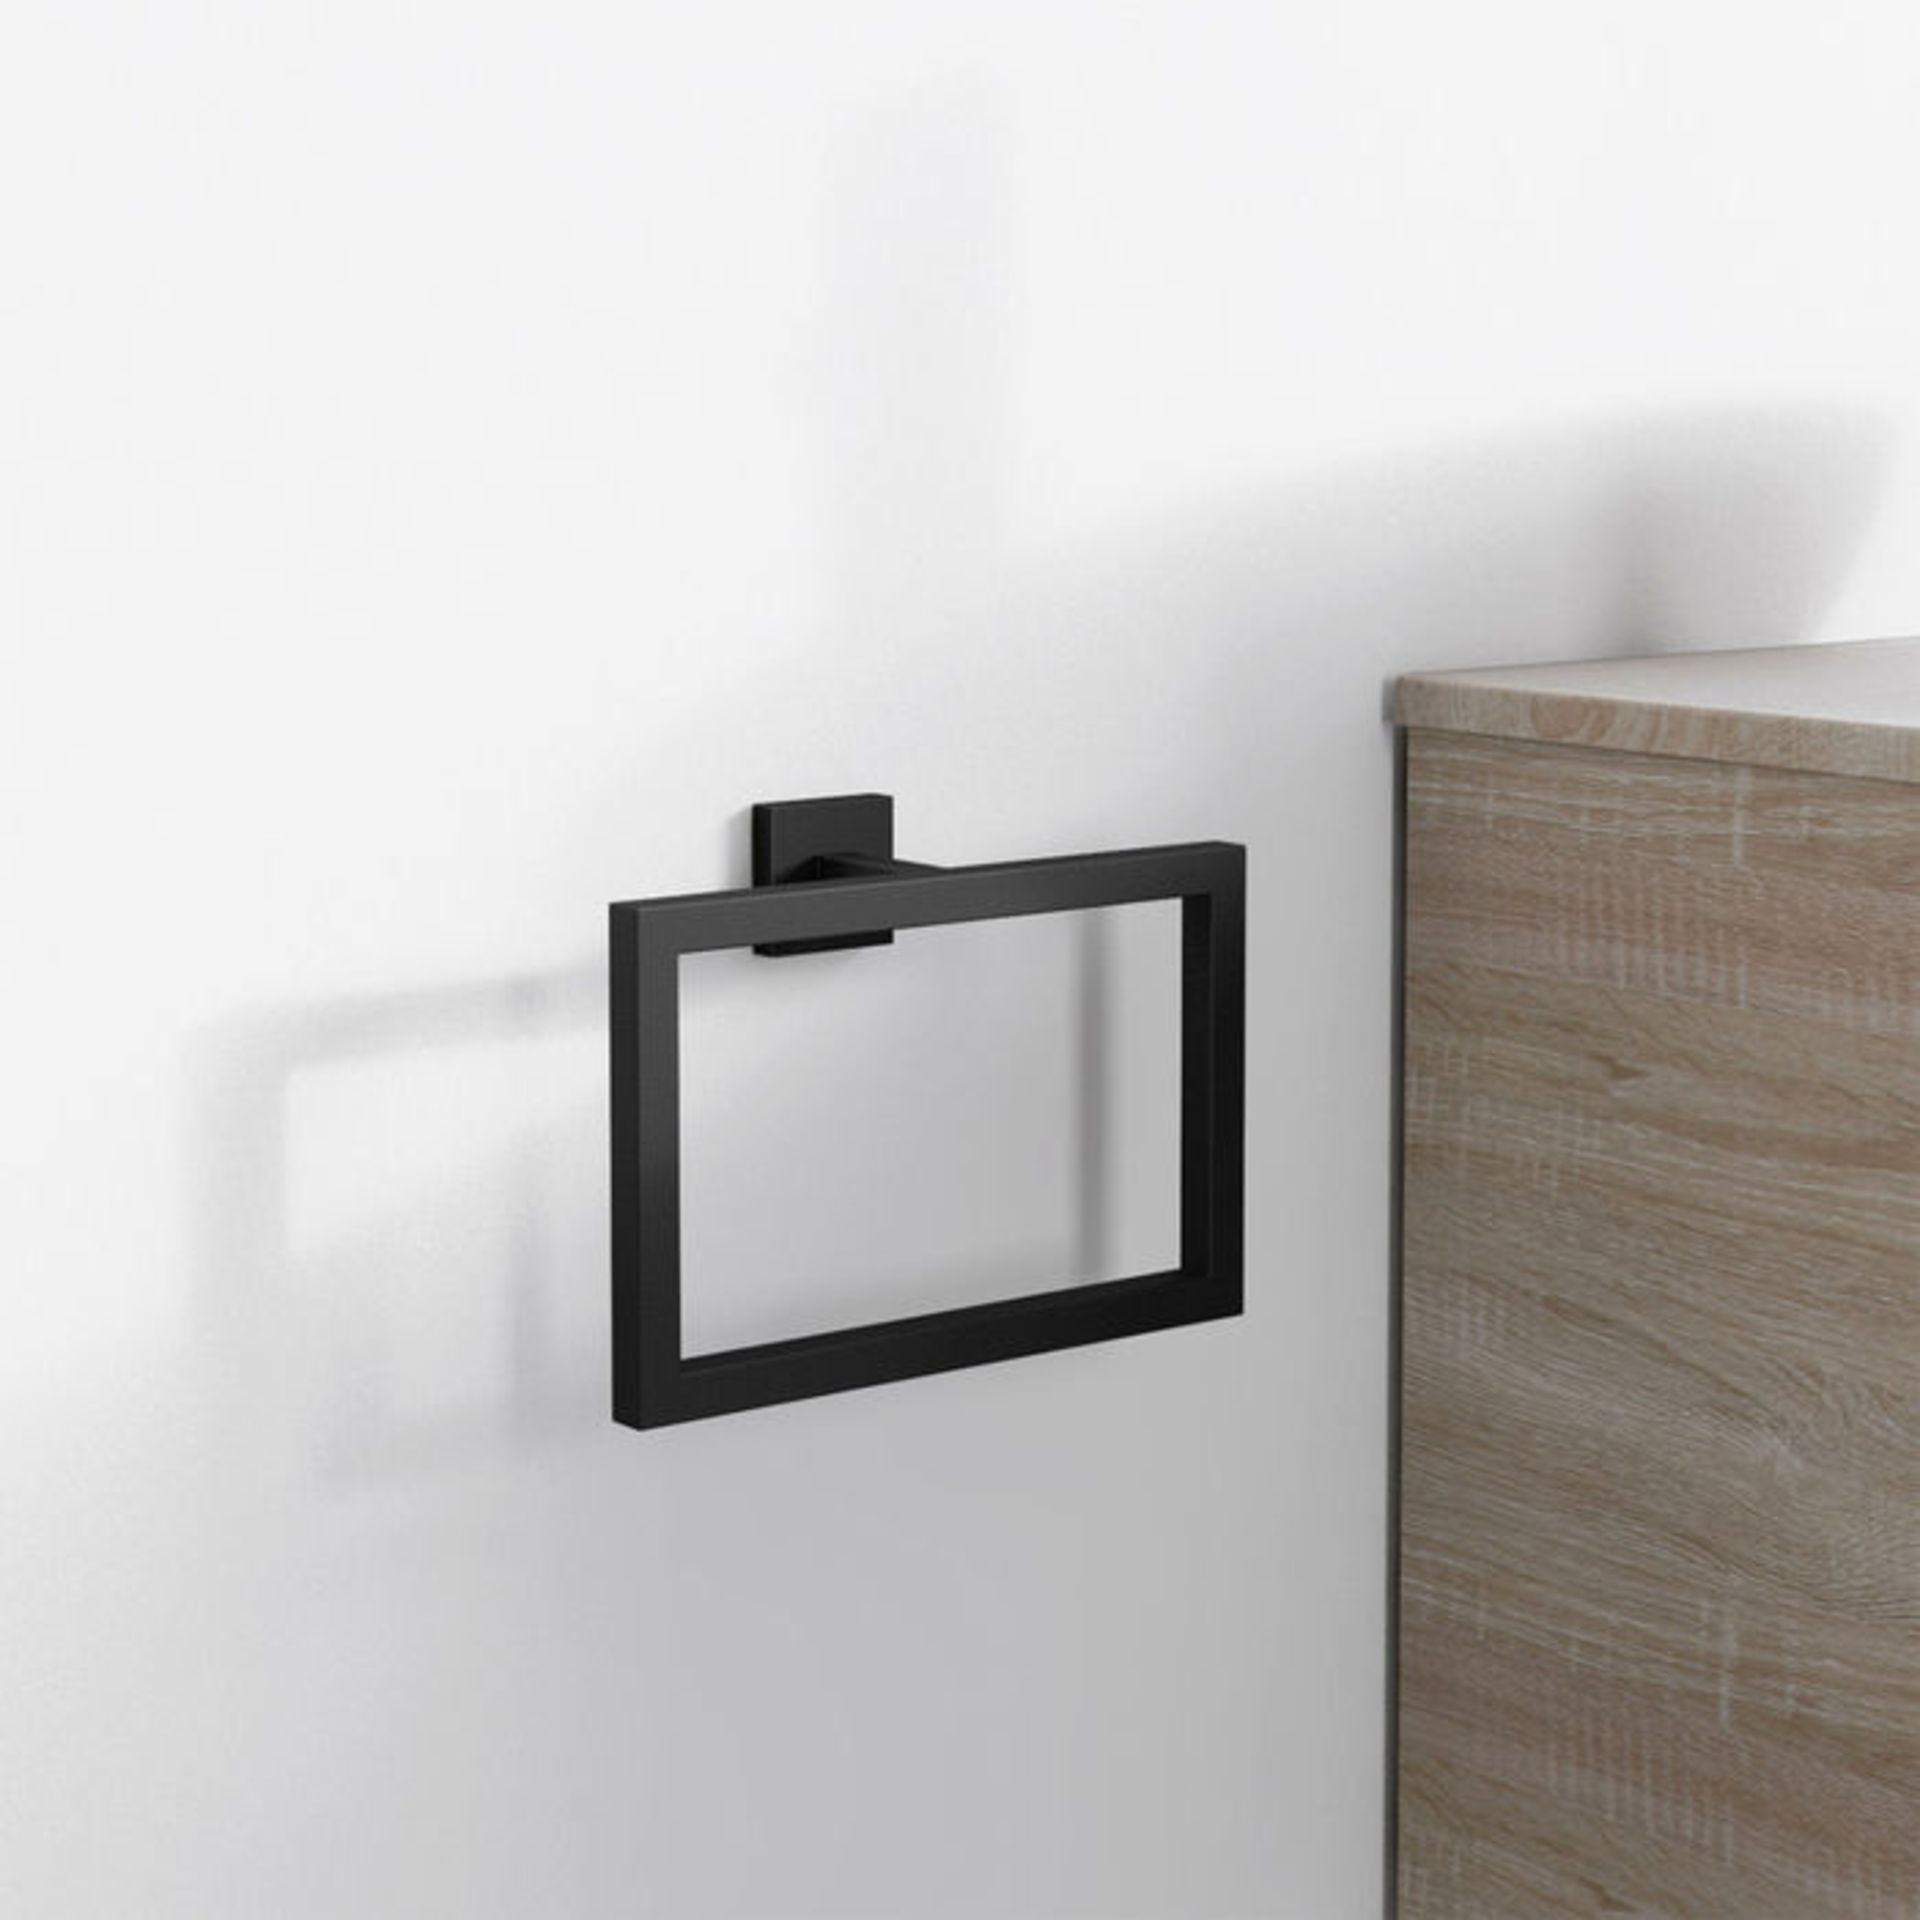 (QT1018) Iker Black Towel Ring Statement aesthetic for minimalist appeal Luxurious, corrosion ... - Image 2 of 6